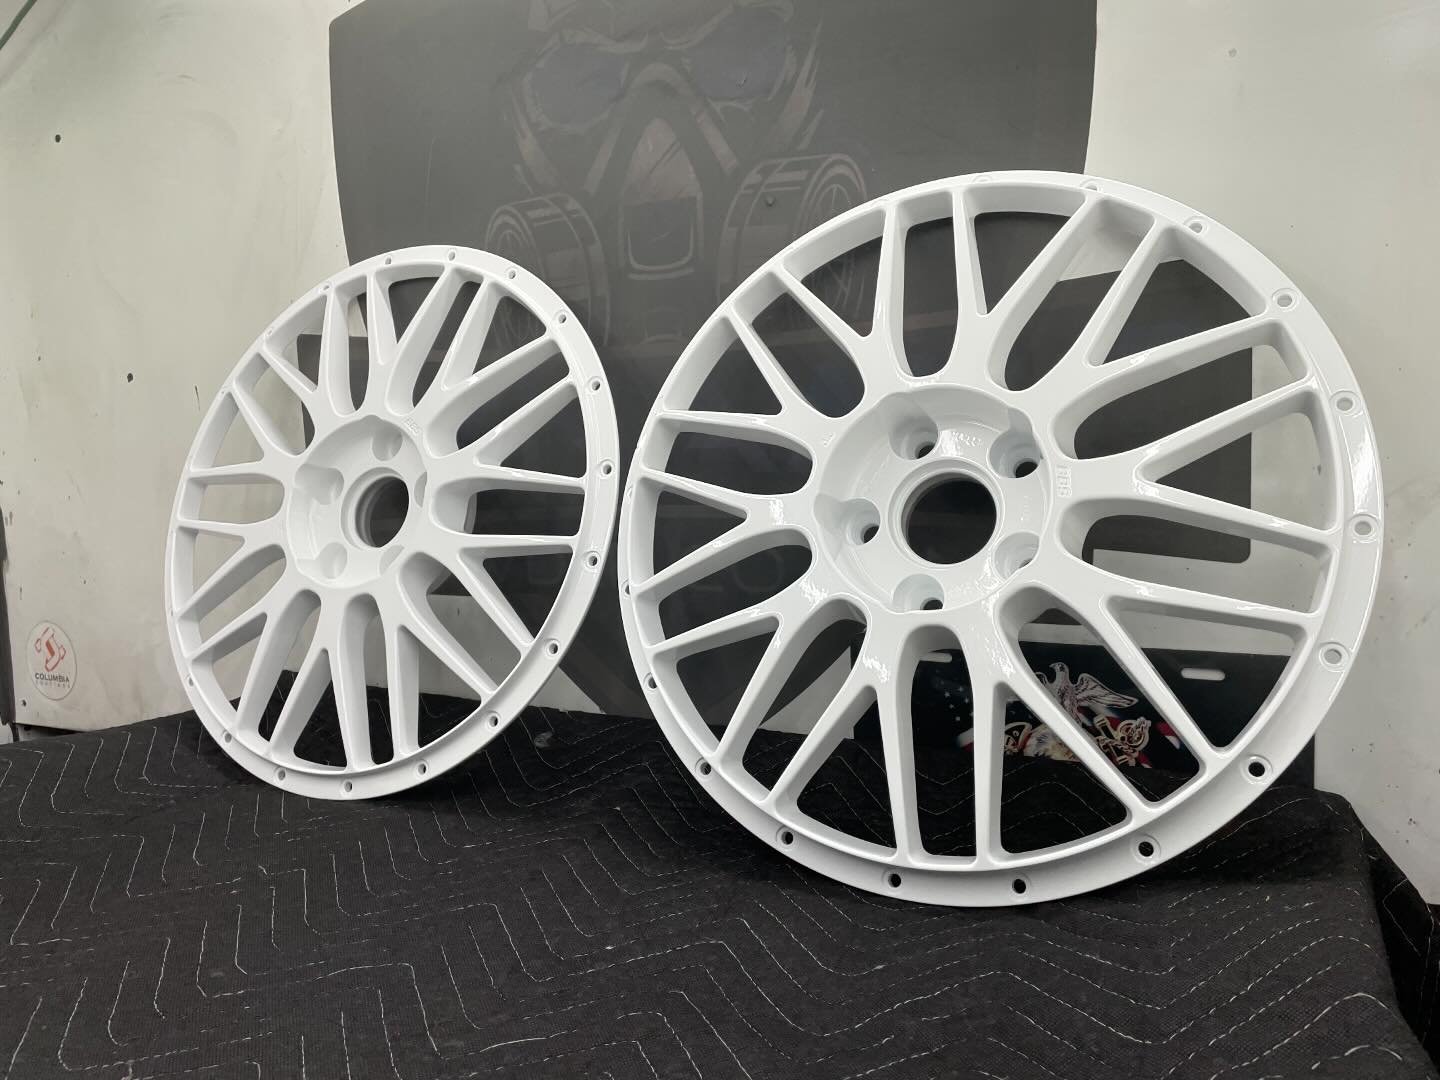 Things have been hectic in the shop lately! Been forgetting to make posts 😅 here&rsquo;s some @bbs.wheels Wheel faces refinished in @columbiacoatings Super Mirror White 🥶🥶
.
.
.
.
#powdercoating #powdercoated #powdercoat #powdercoatedwheels #icedo